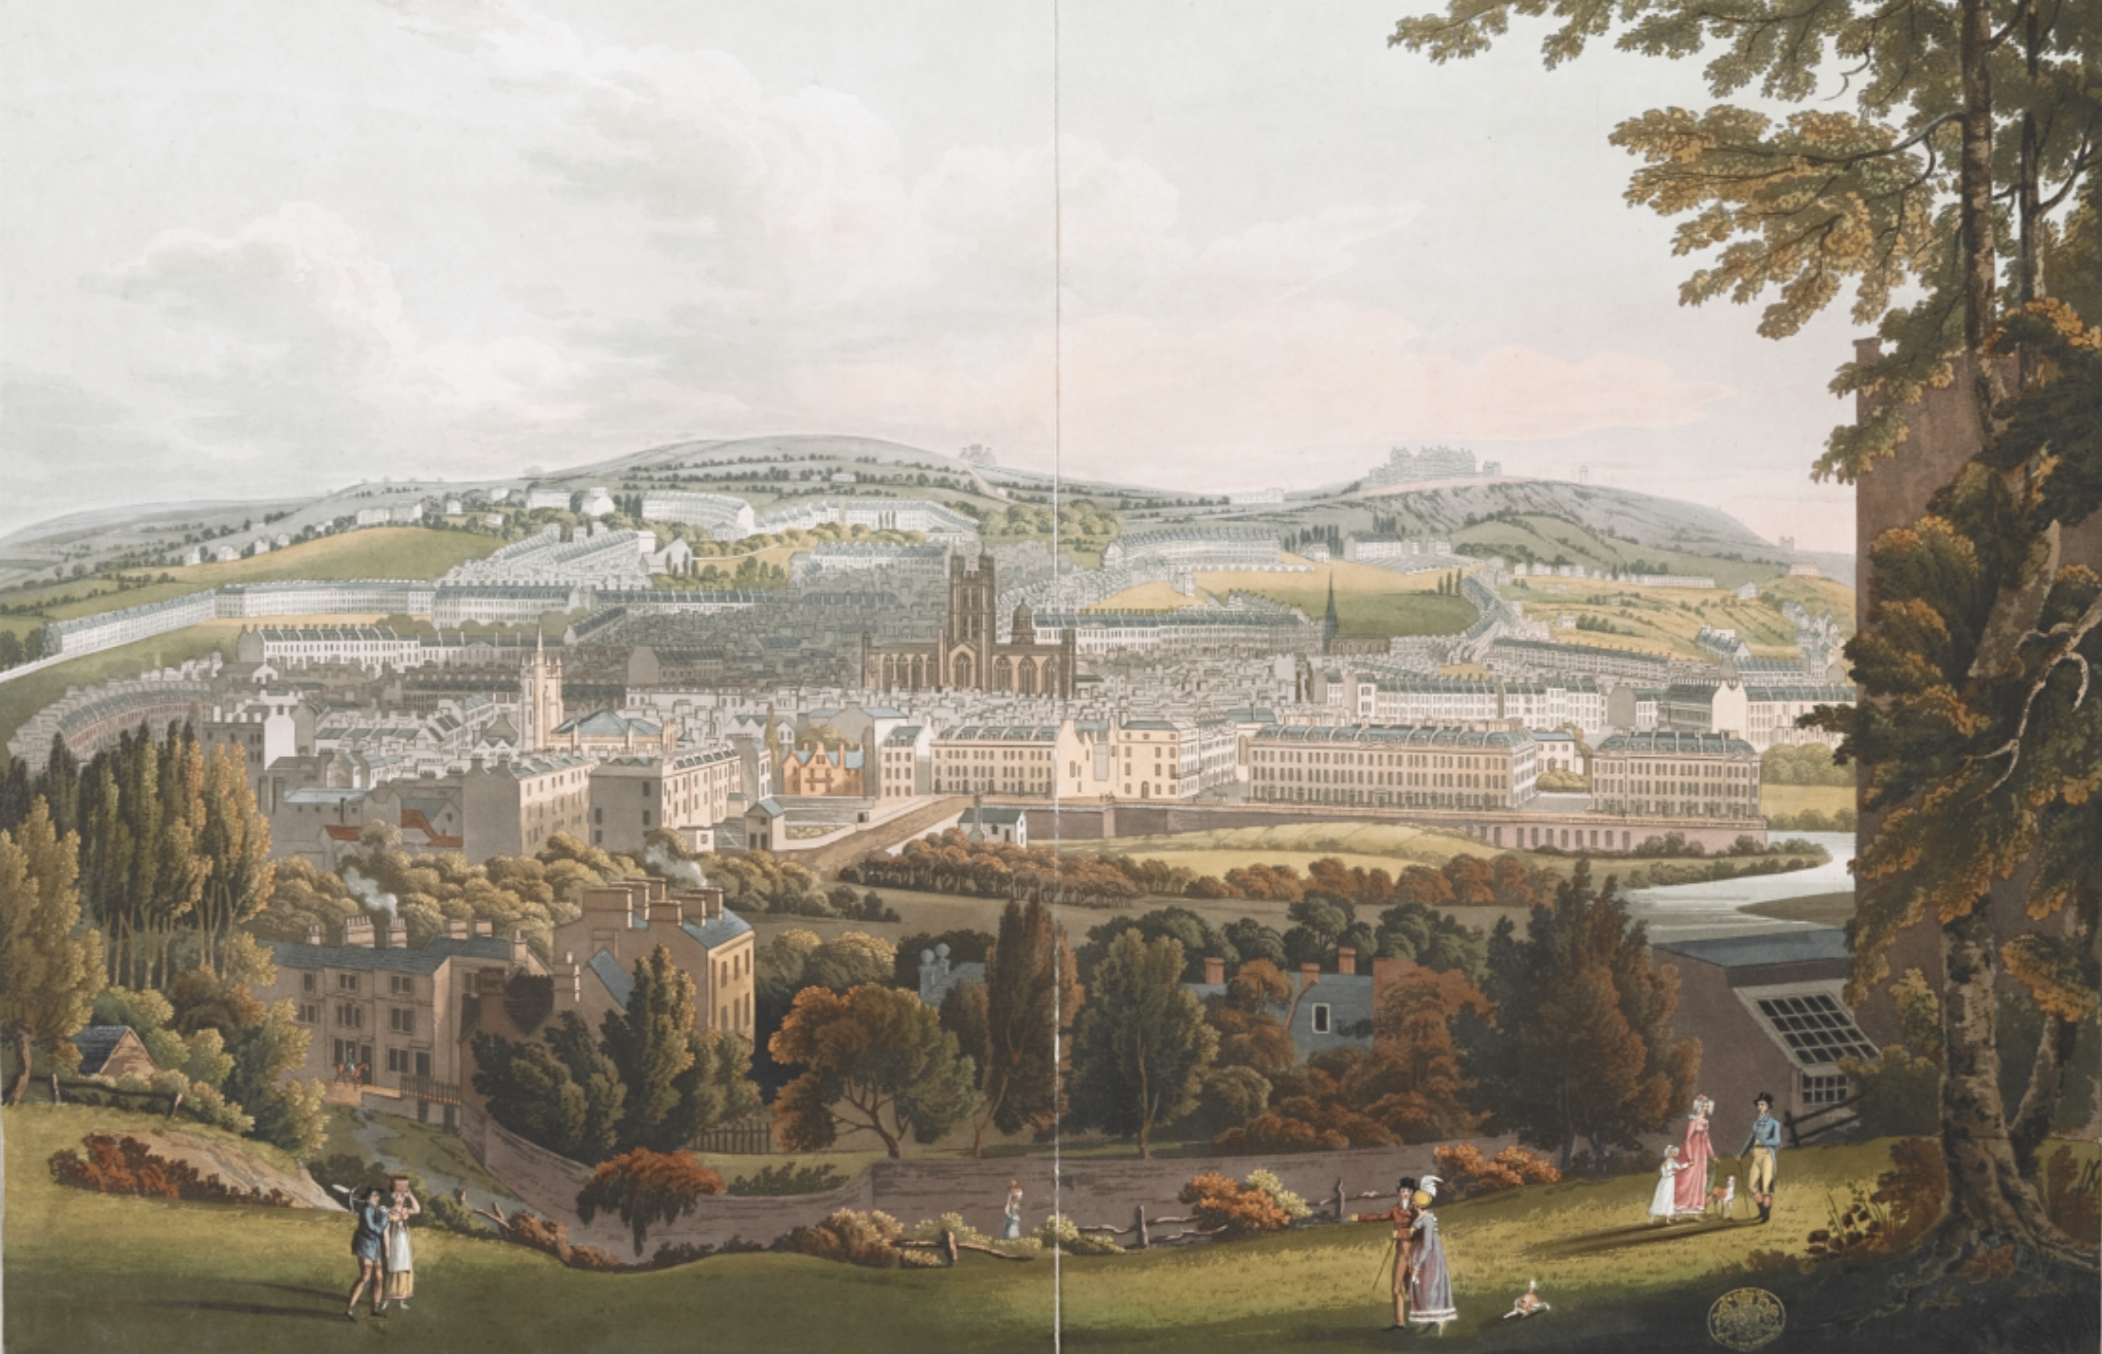 Engraving from the eighteenth century of the city of Bath as seen from a distance